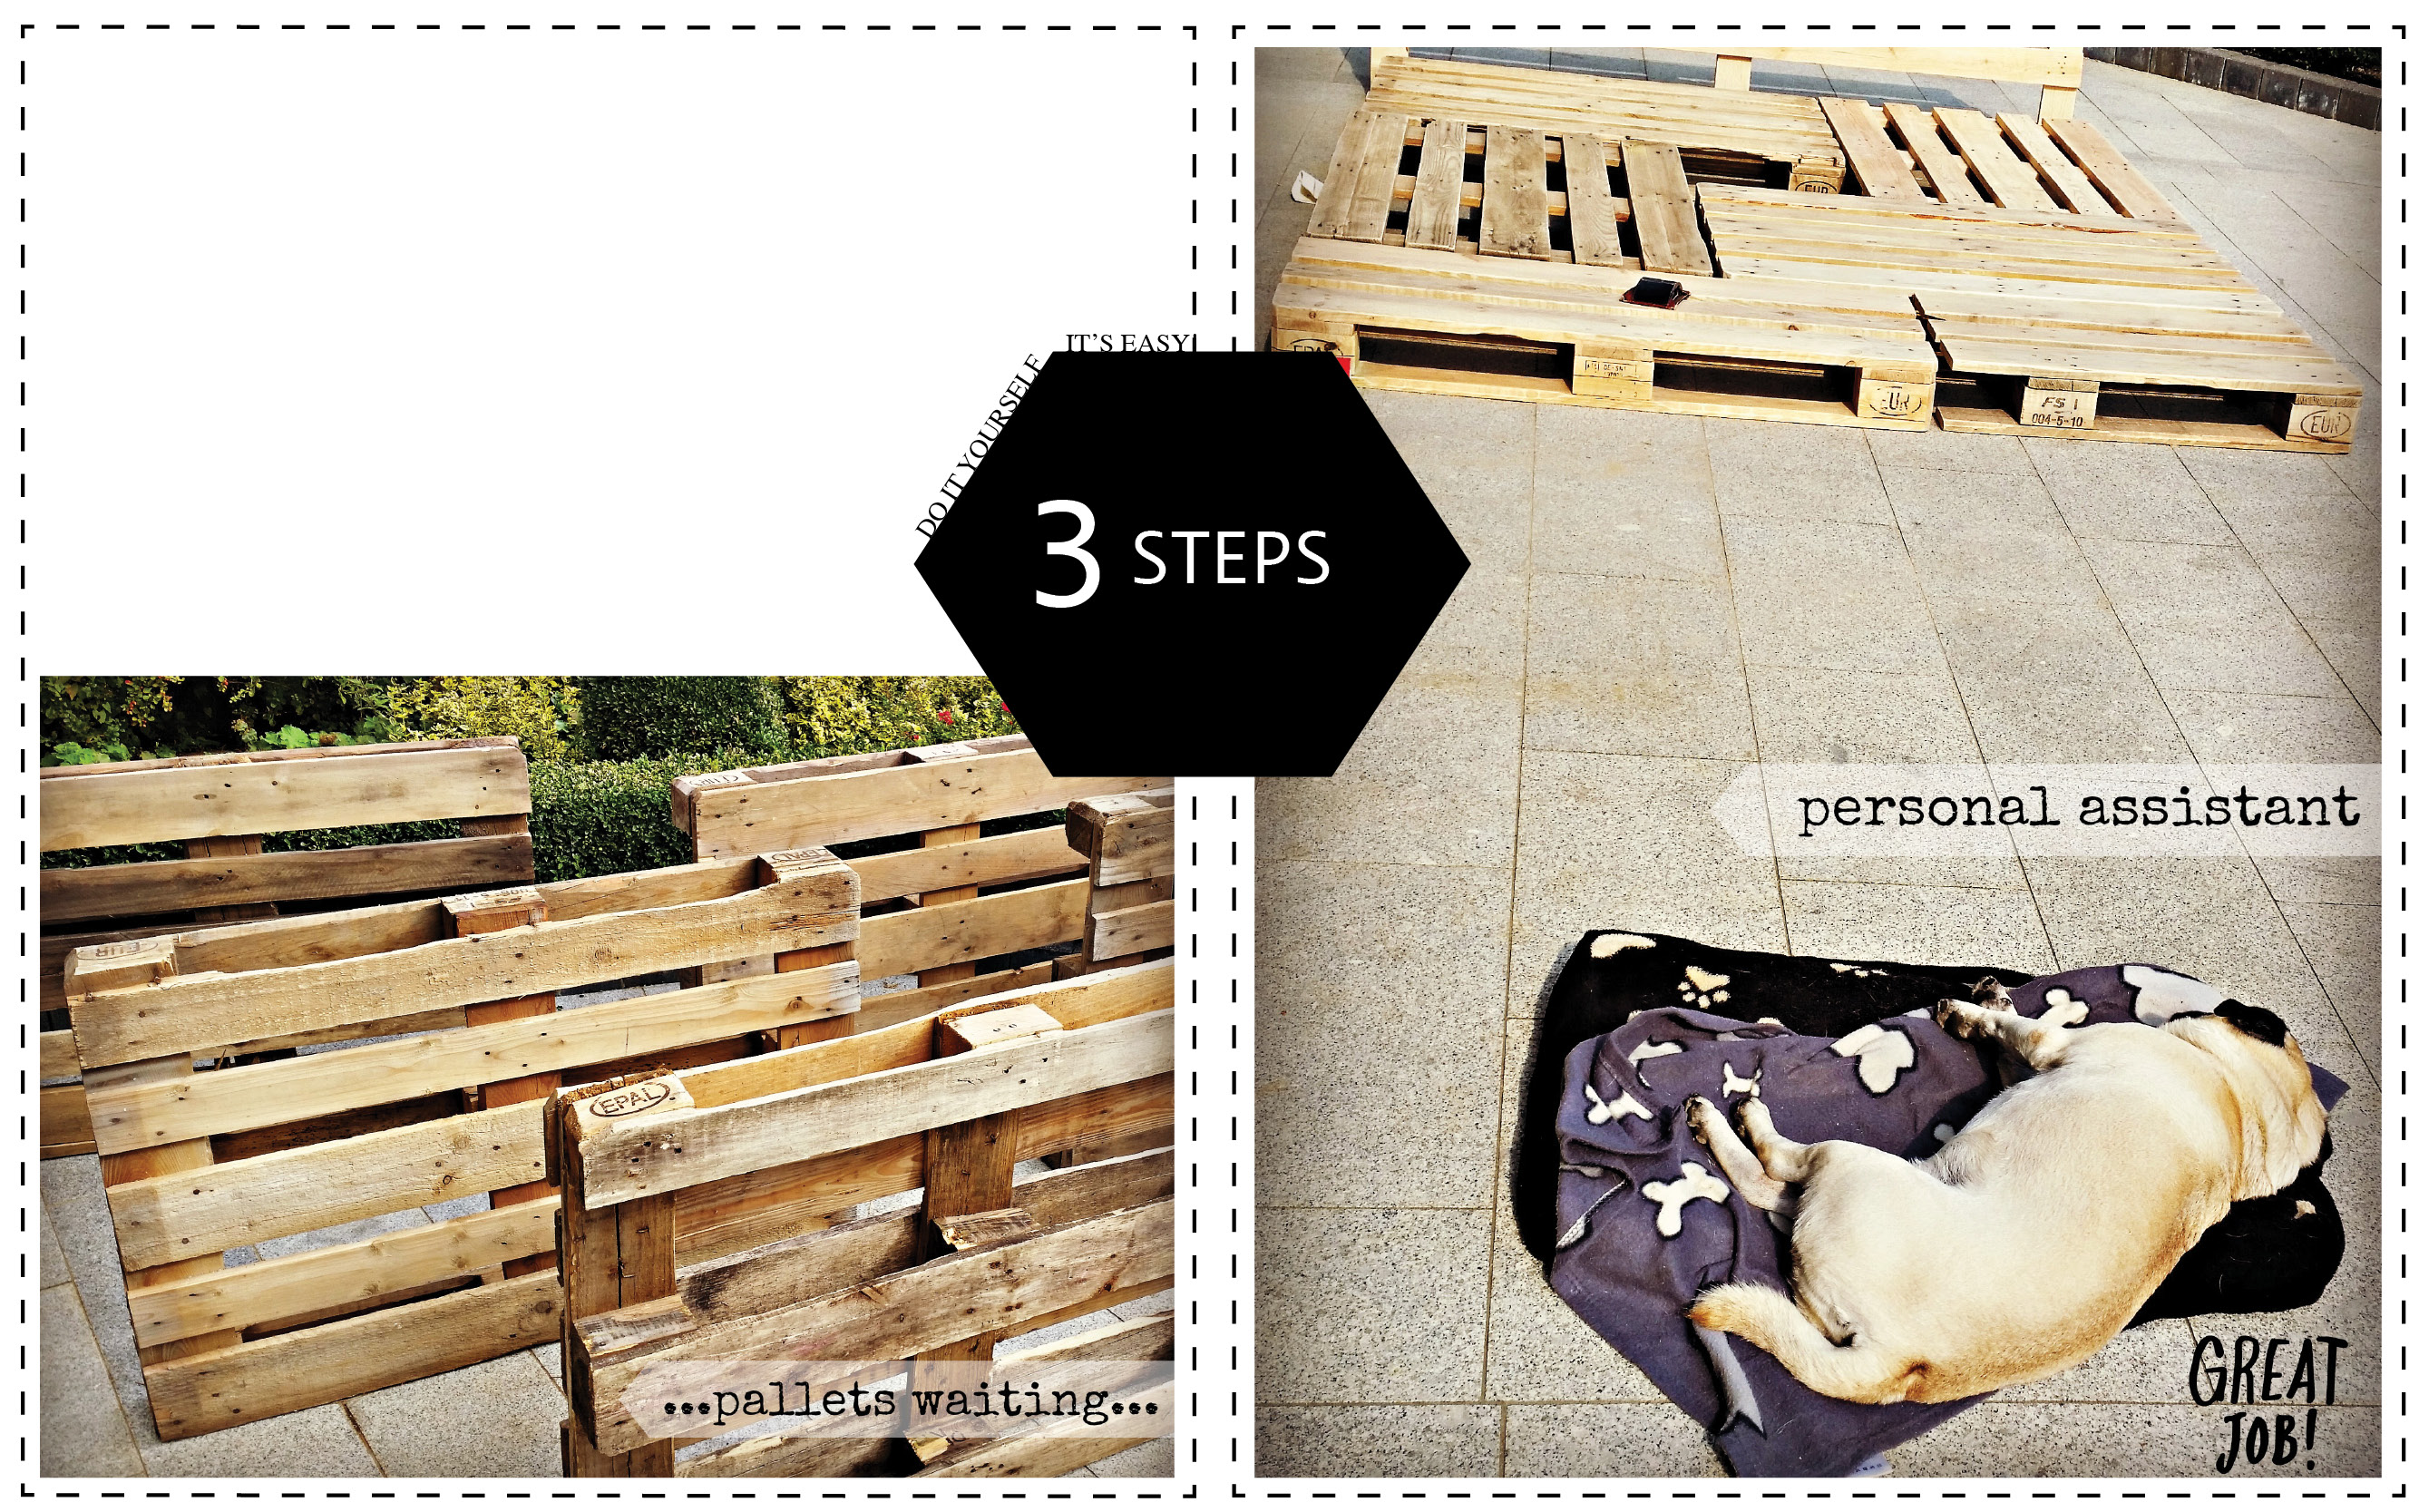 Pallet Bed | Getting ready